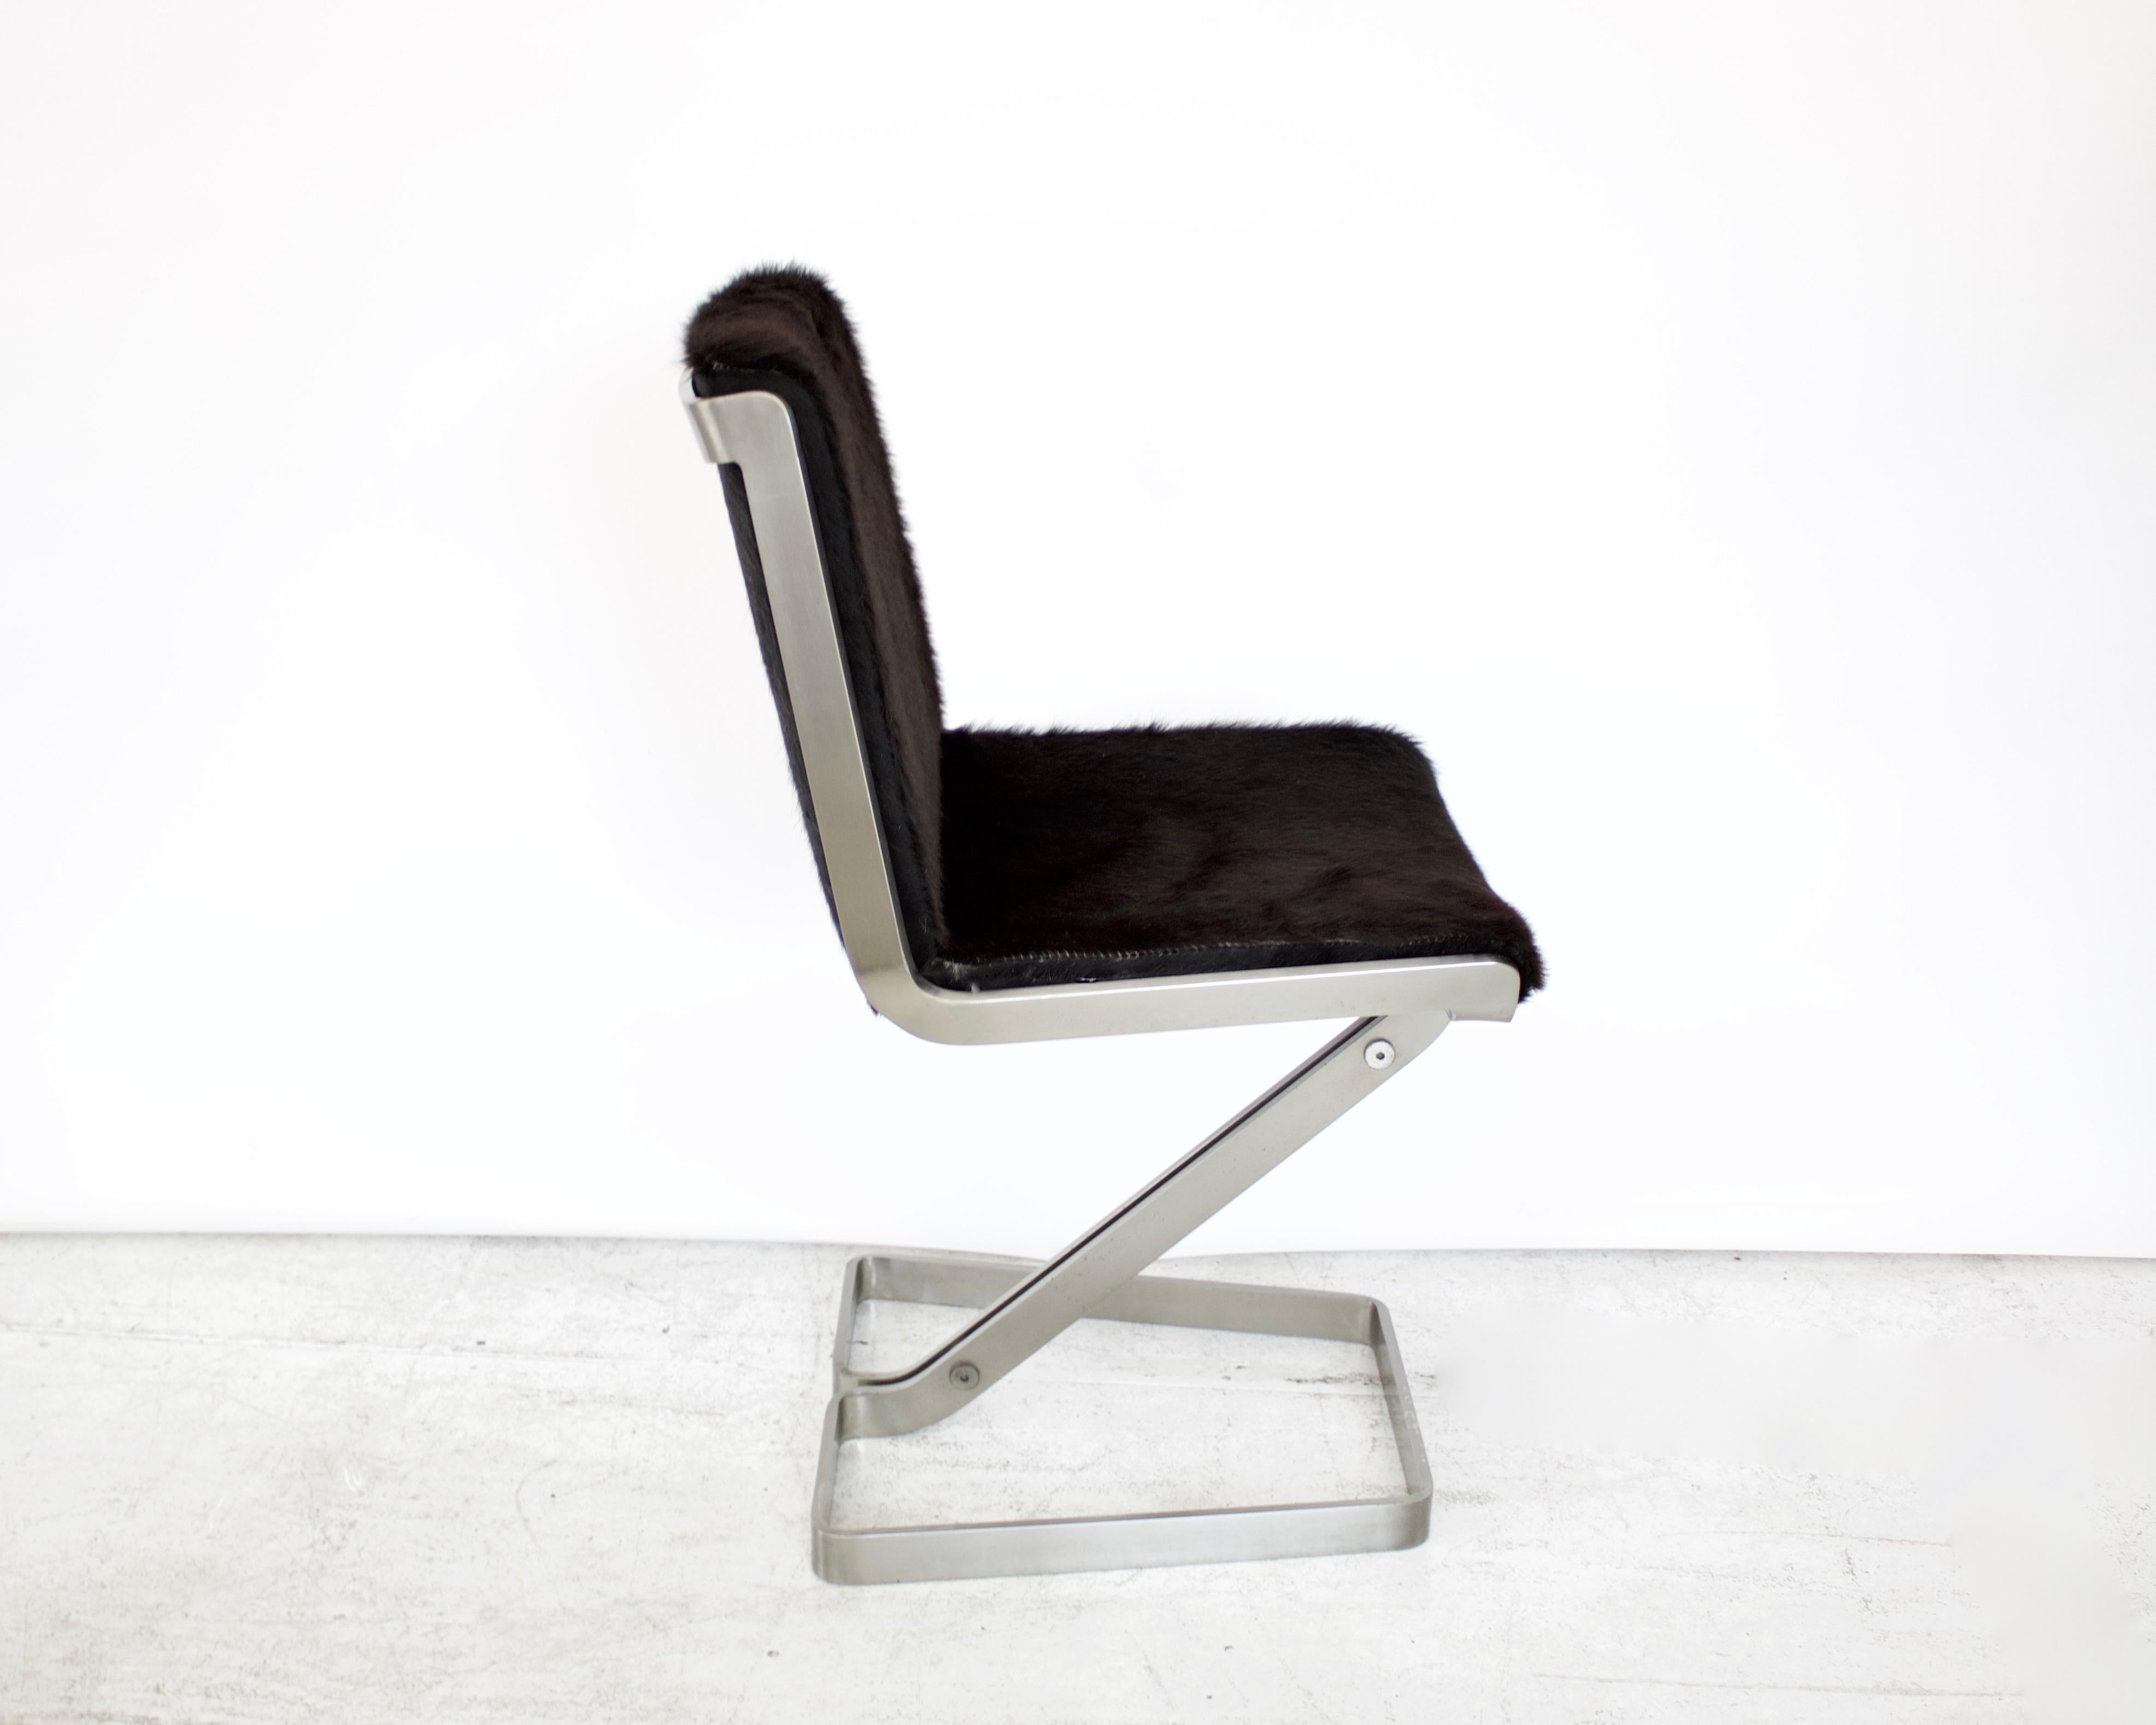 Stainless steel desk chair by Forma Nova and newly reupholstered in black hair on hide cowhide. The stainless steel is polished with a matte surface with no pitting or surface issues. The frame of the chair if very heavy and substantial.
The chair